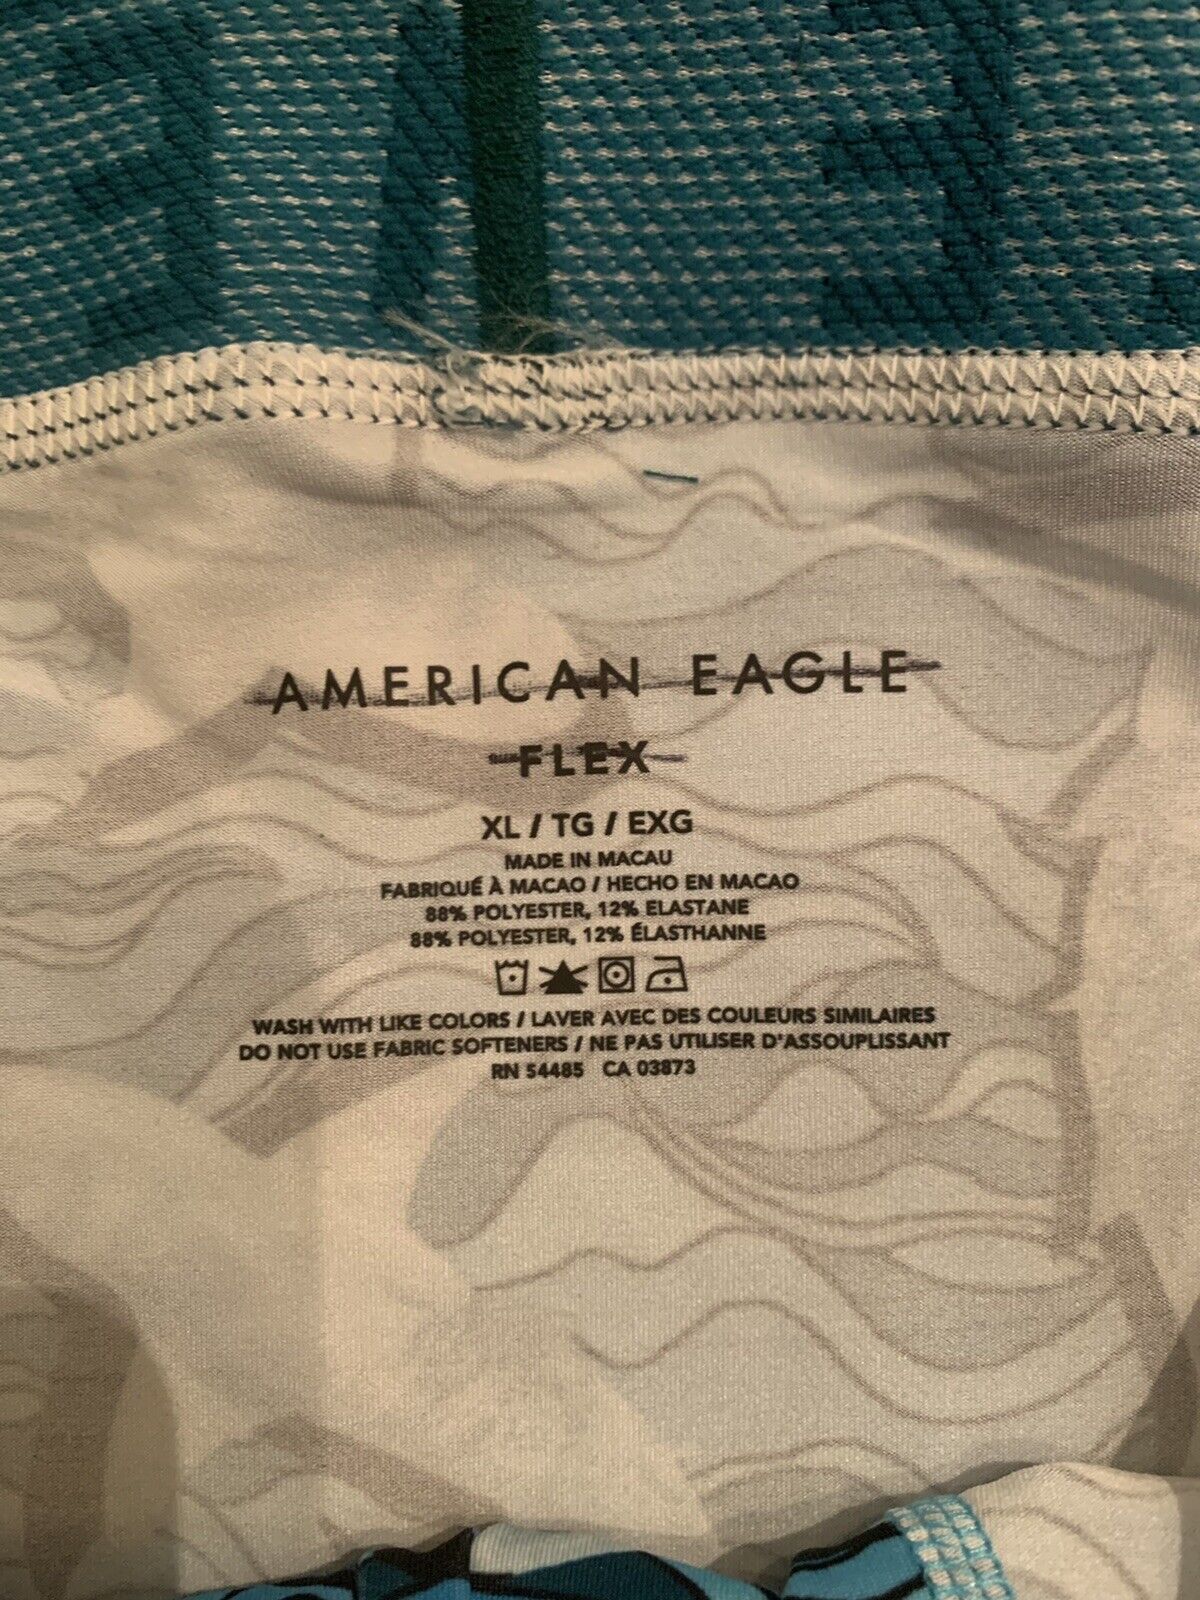 American Eagle AEO Flex Boxer Trunks Sharks Blue Water Extra Large XL